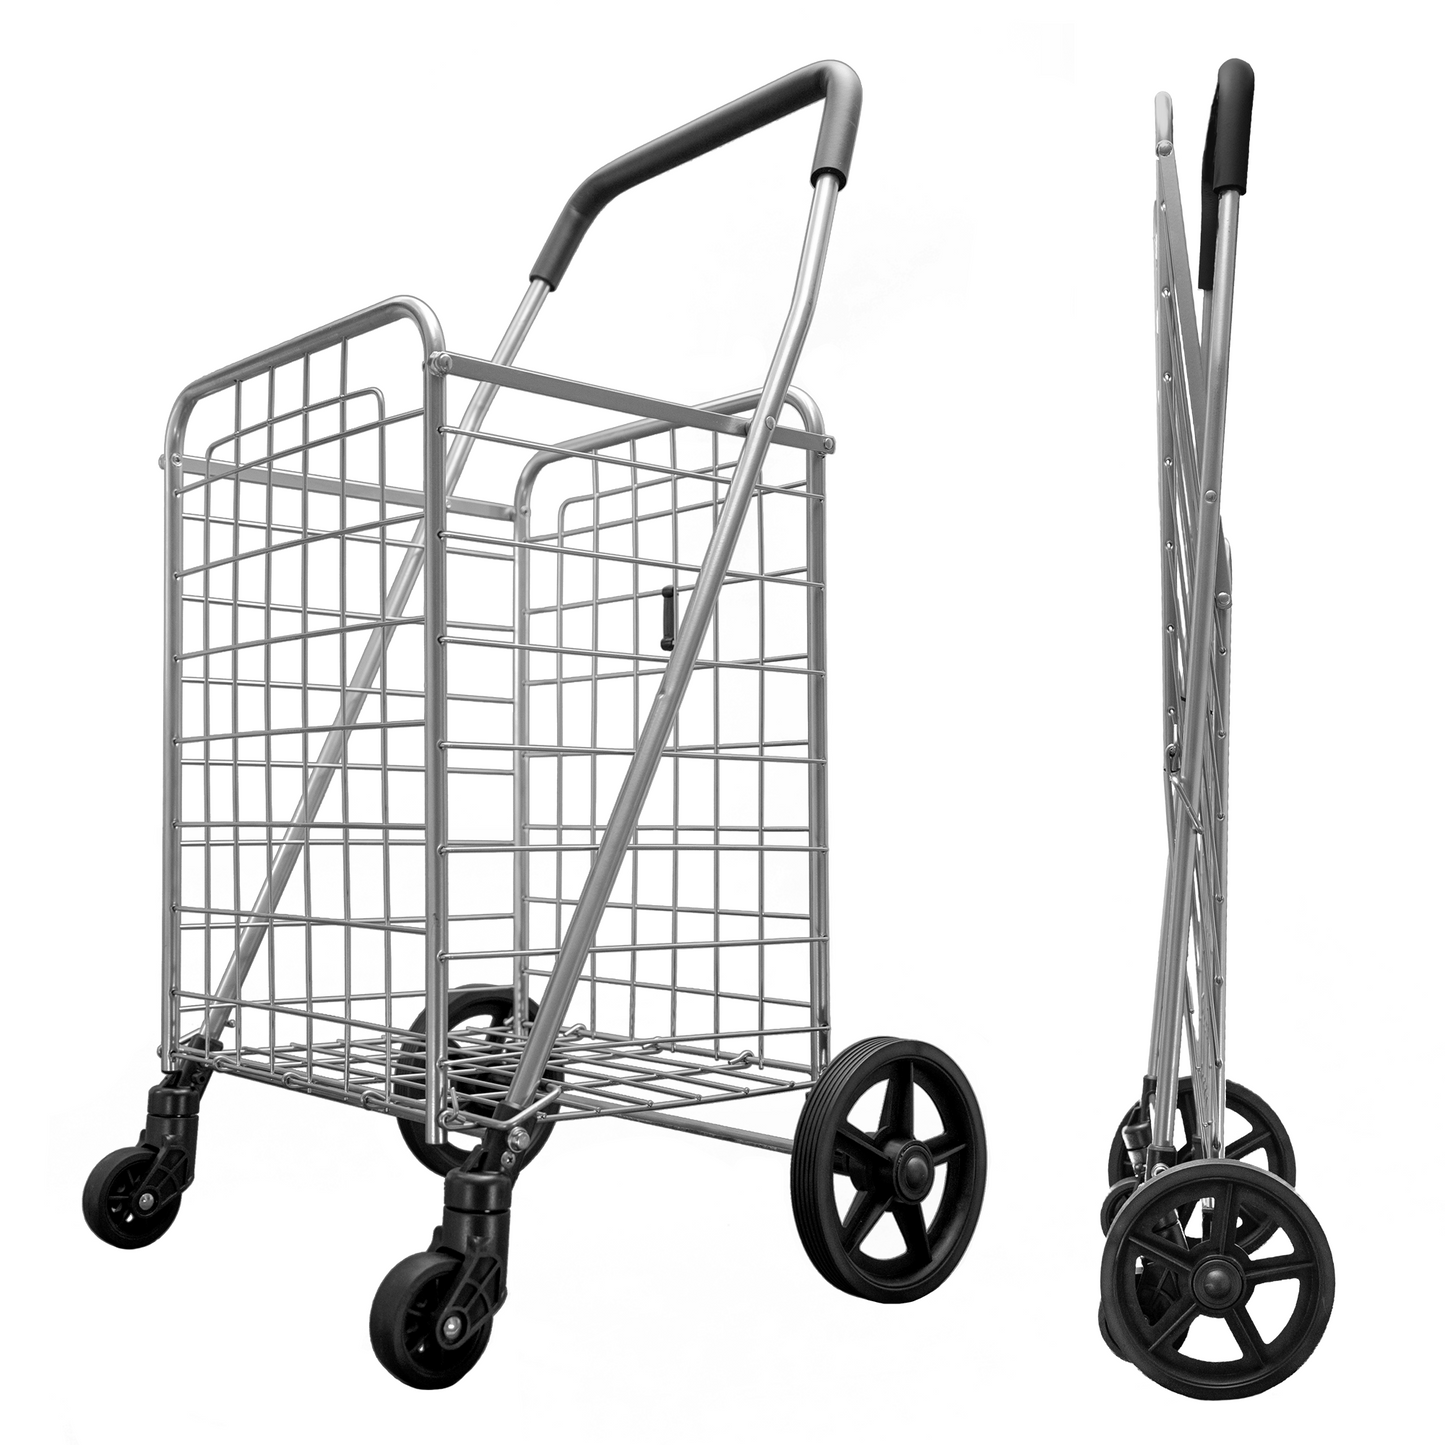 Folding Shopping Cart with Patent Pending Swivel Wheels and Single Basket, Medium Silver S-2142